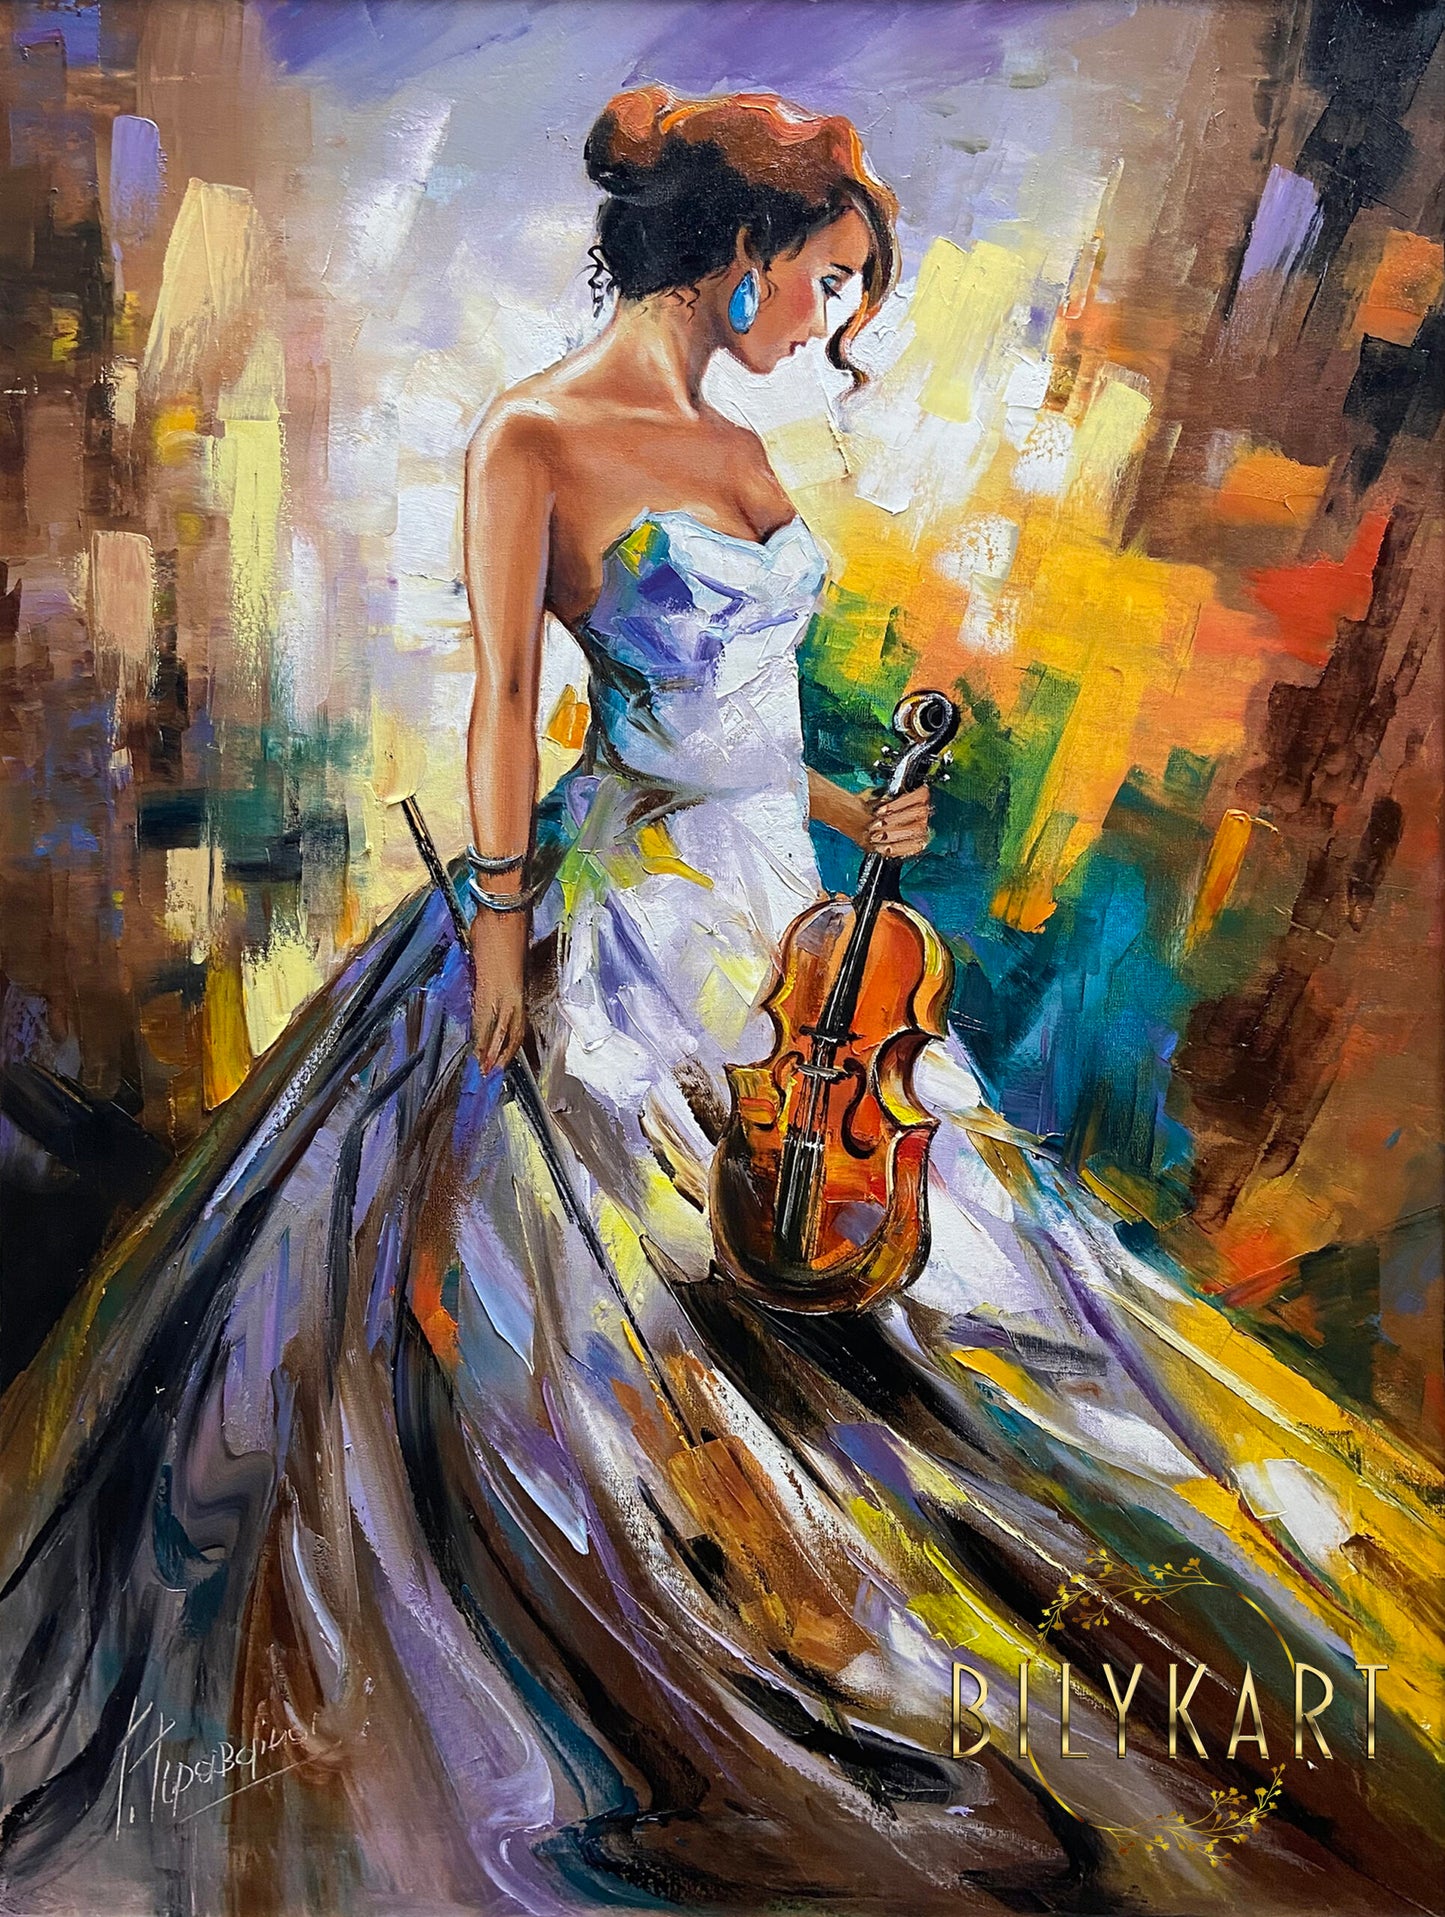 Lady with Violin Oil Painting Original Large Abstract Woman in White Dress Painting on Canvas